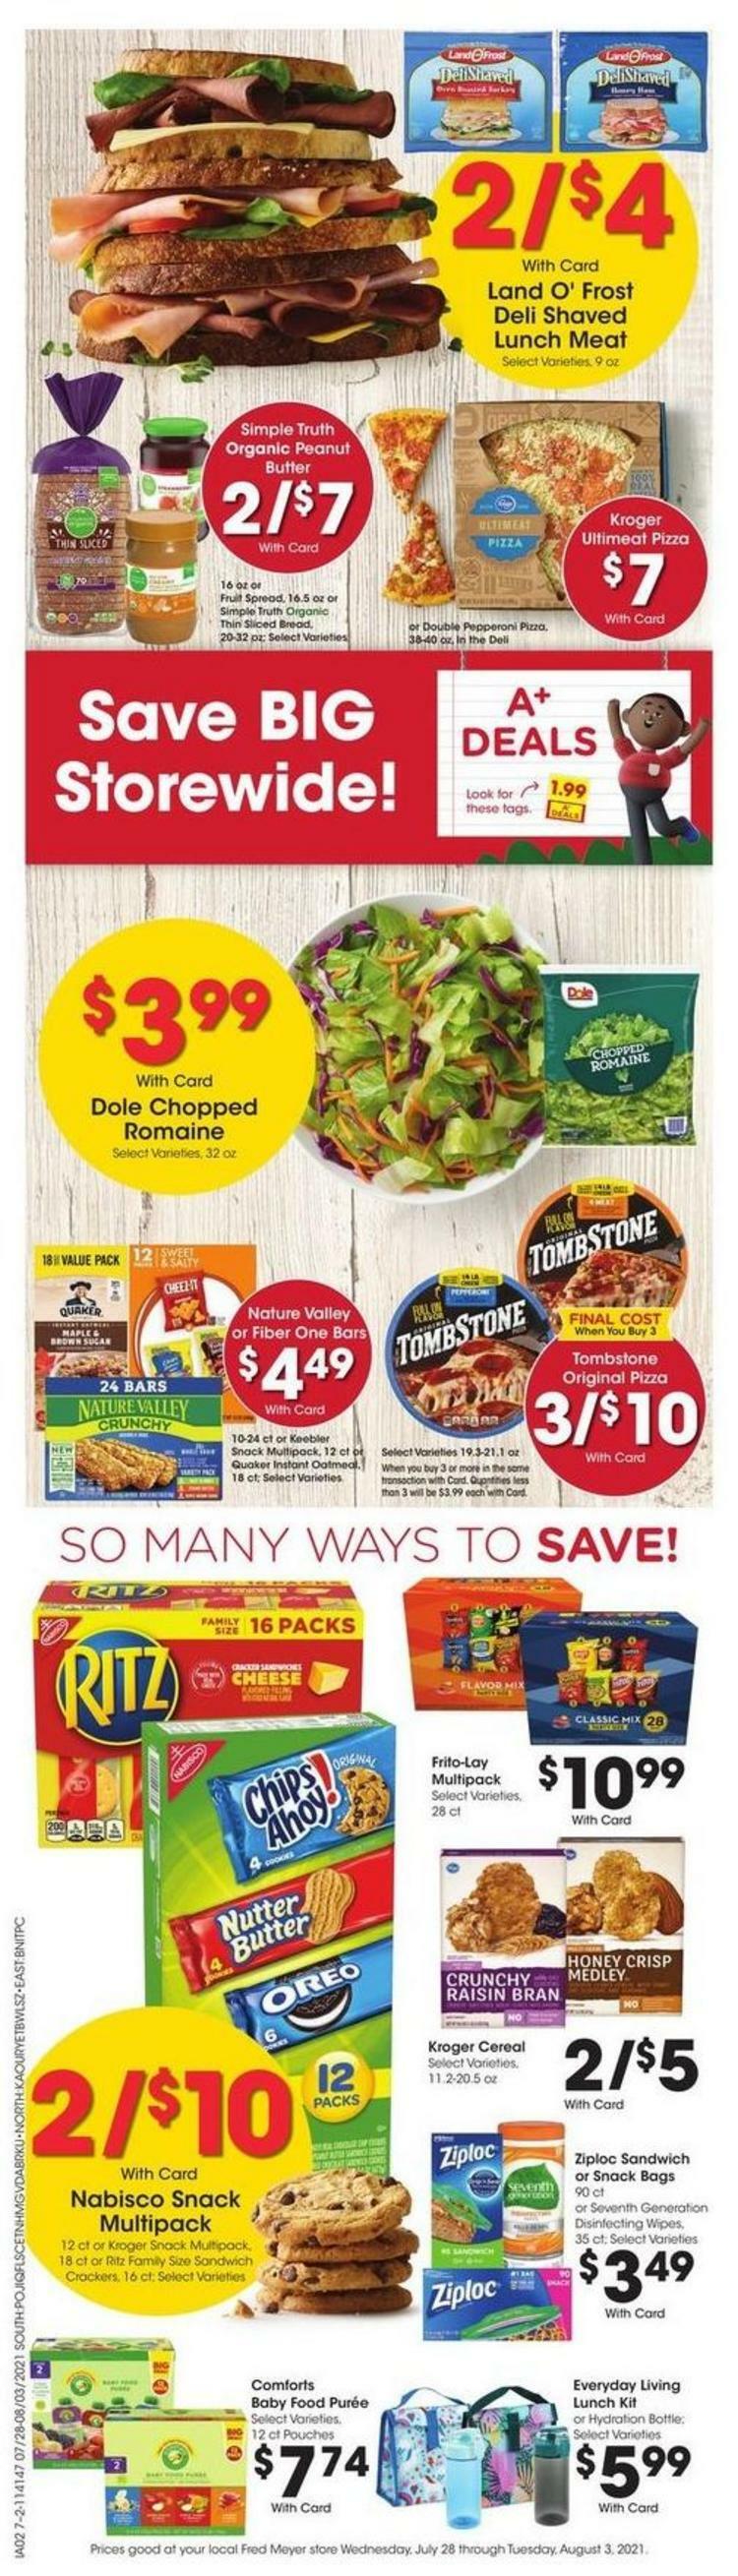 Fred Meyer Weekly Ad from July 28